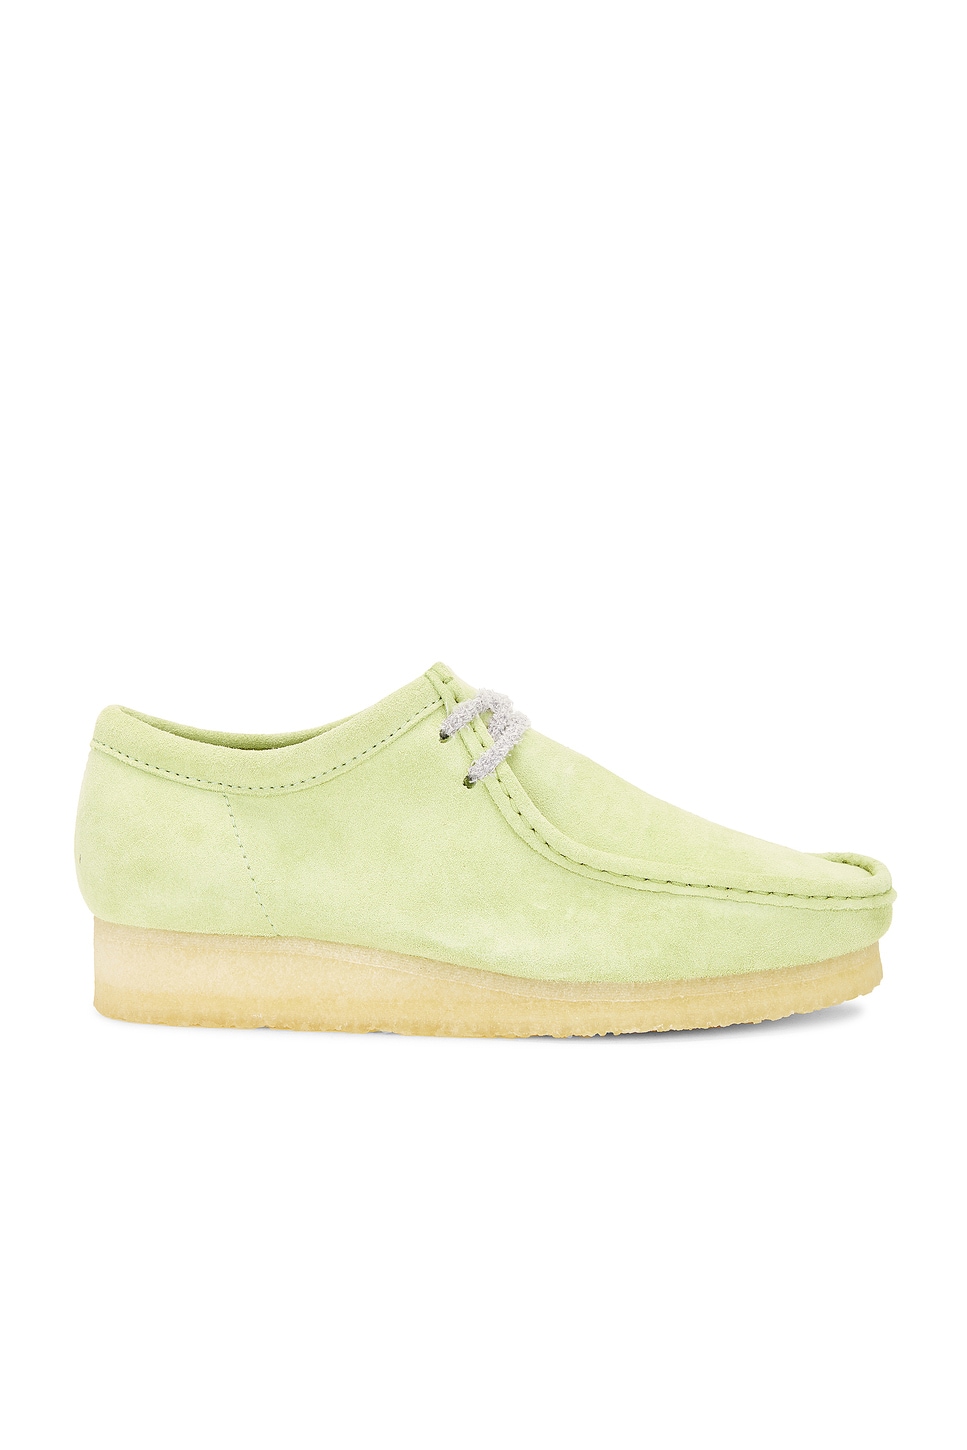 Image 1 of Clarks Wallabee Boot in Pale Lime Suede